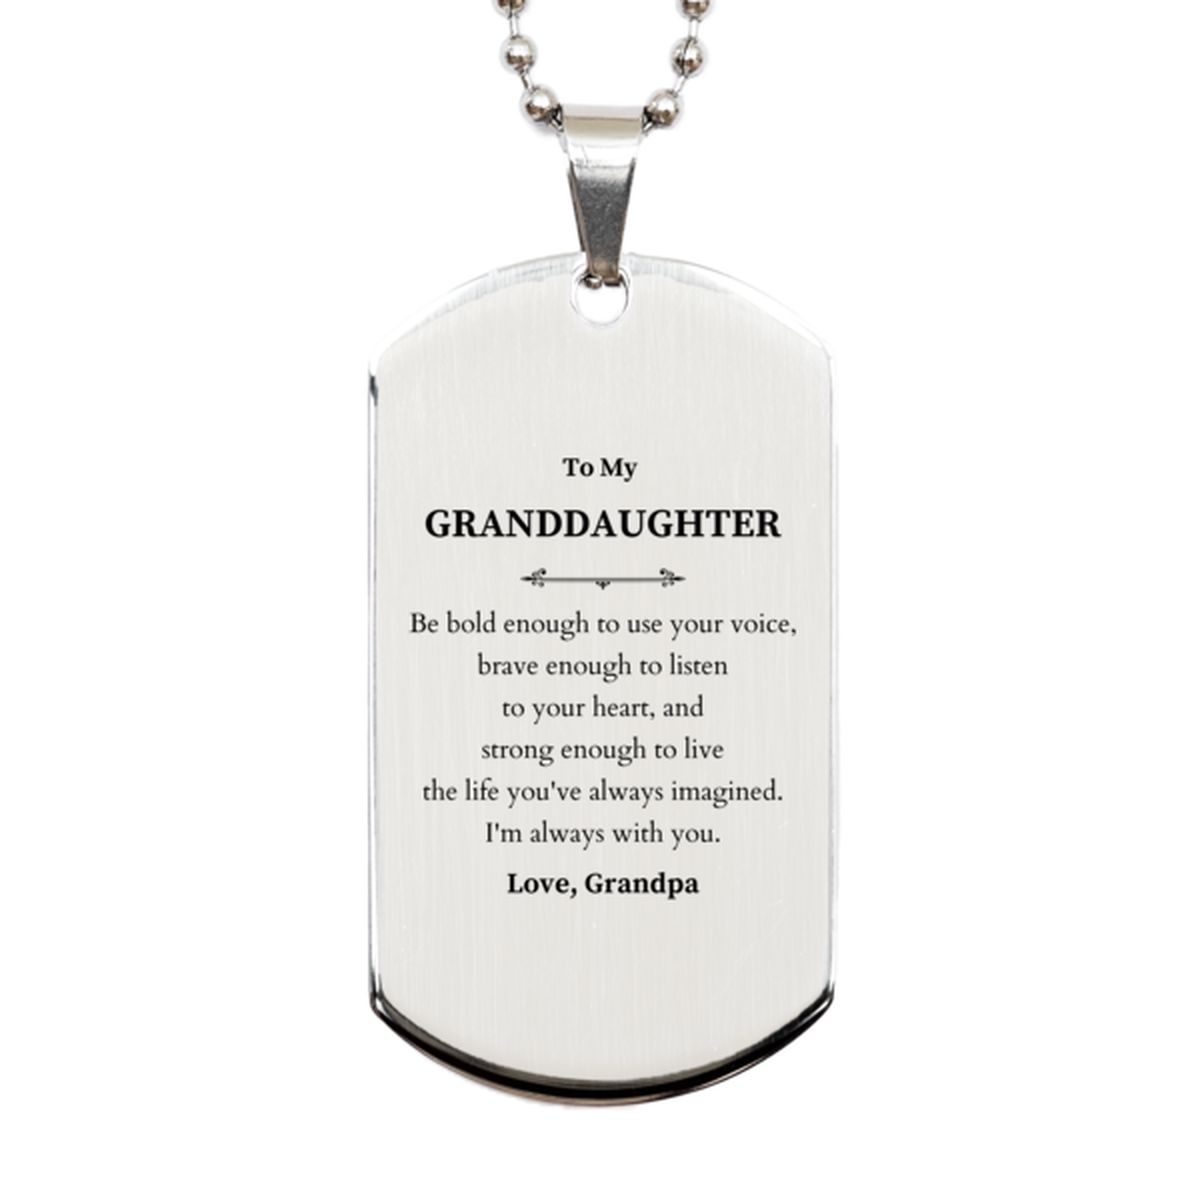 Keepsake Granddaughter Silver Dog Tag Gift Idea Graduation Christmas Birthday Granddaughter from Grandpa, Granddaughter Be bold enough to use your voice, brave enough to listen to your heart. Love, Grandpa